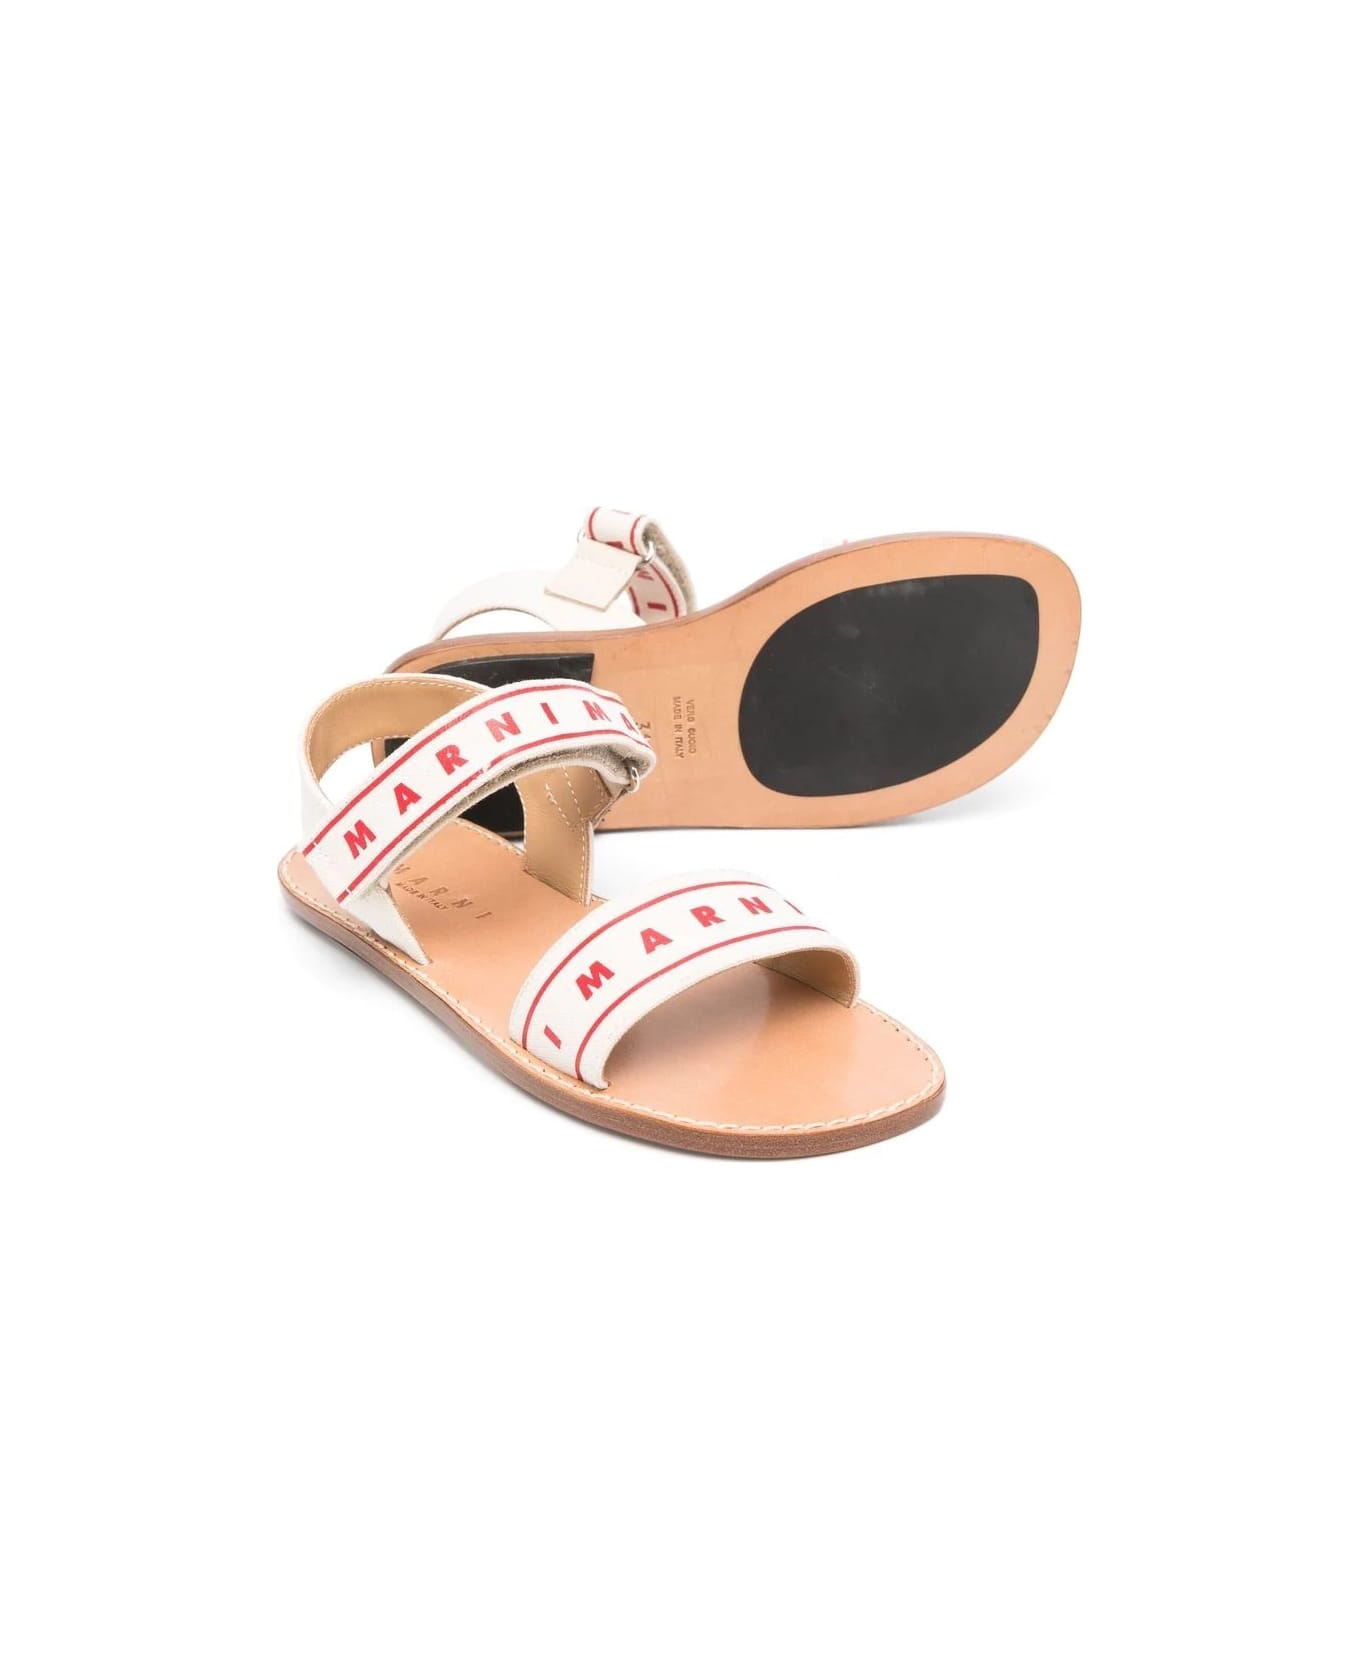 Marni Sandals With Print - White